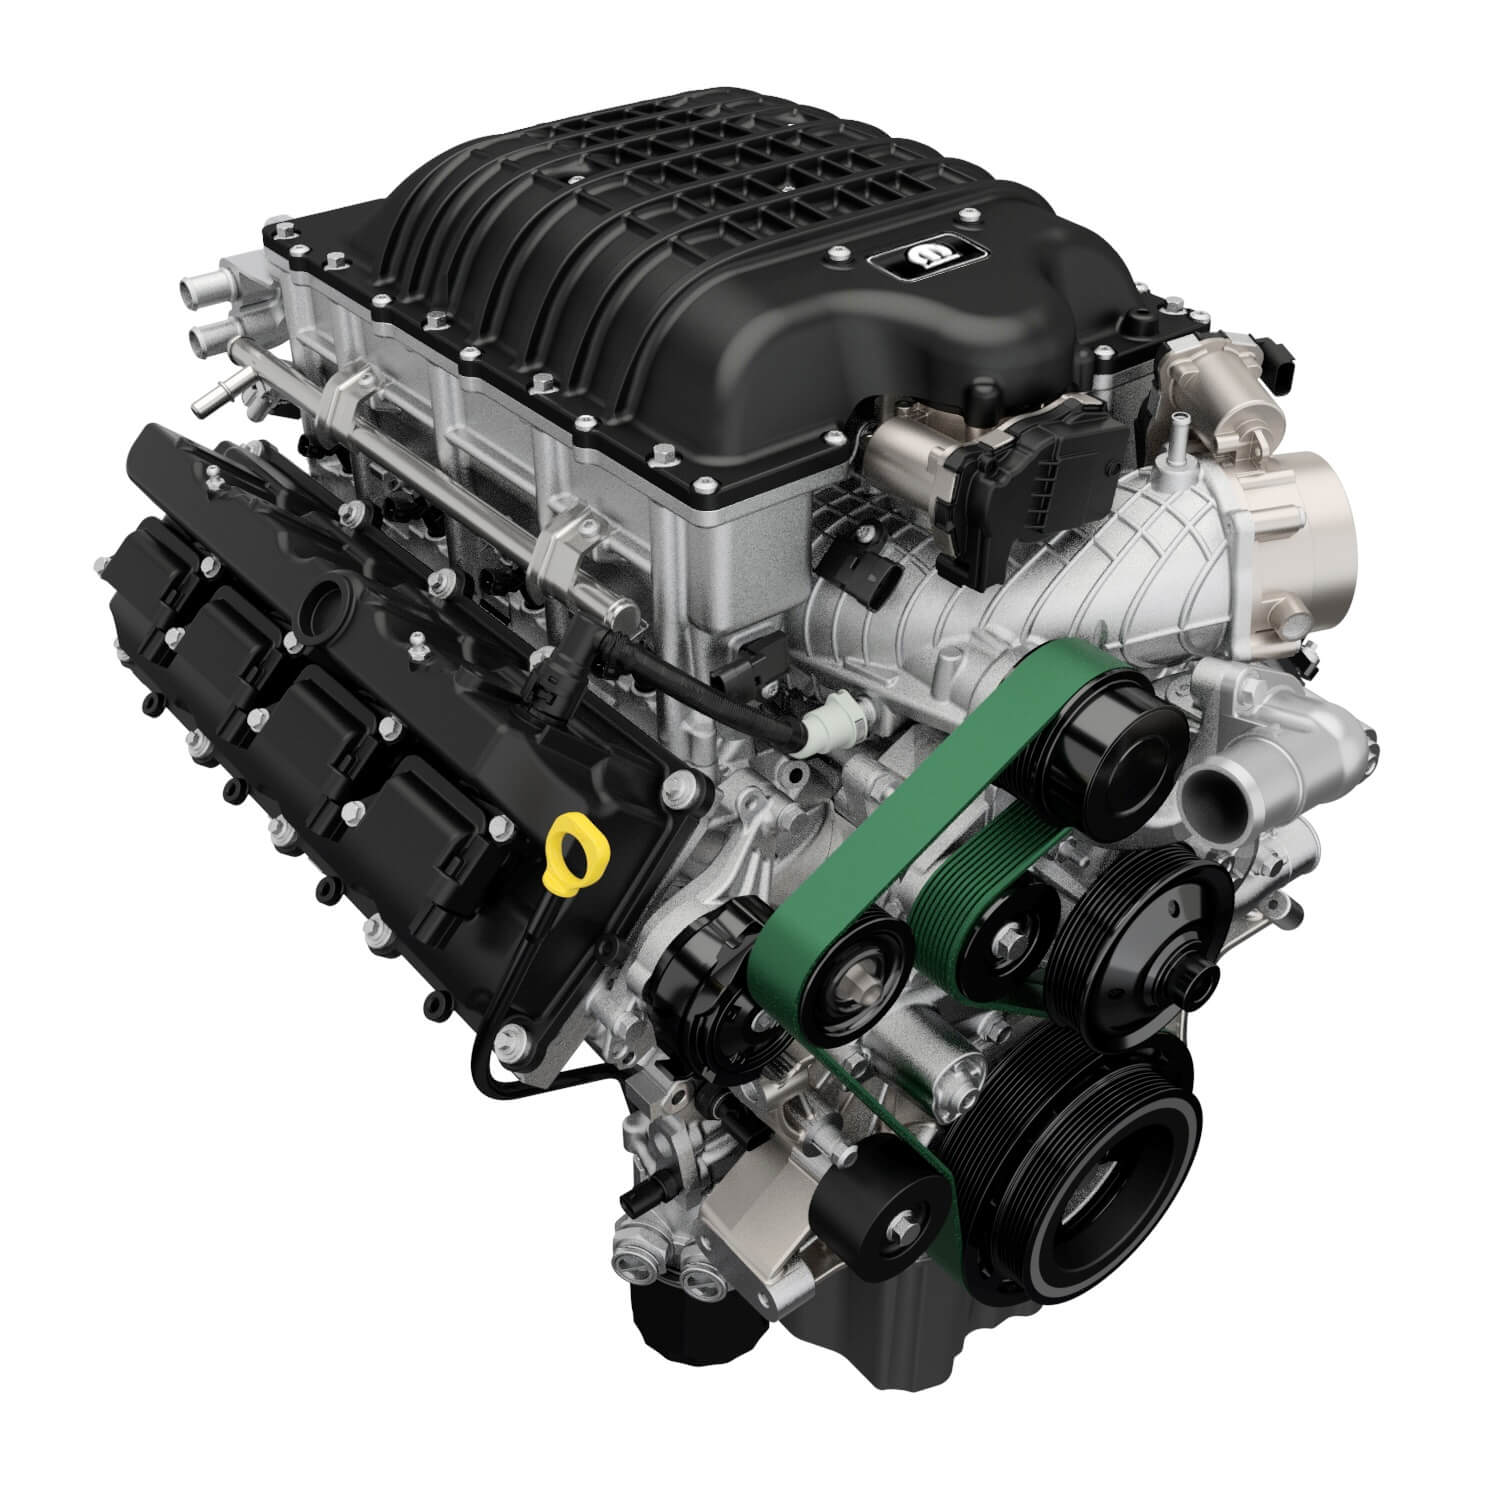 Marketing photo of a 426-cubic inch supercharged Hemi V8 crate engine built in Mexico.